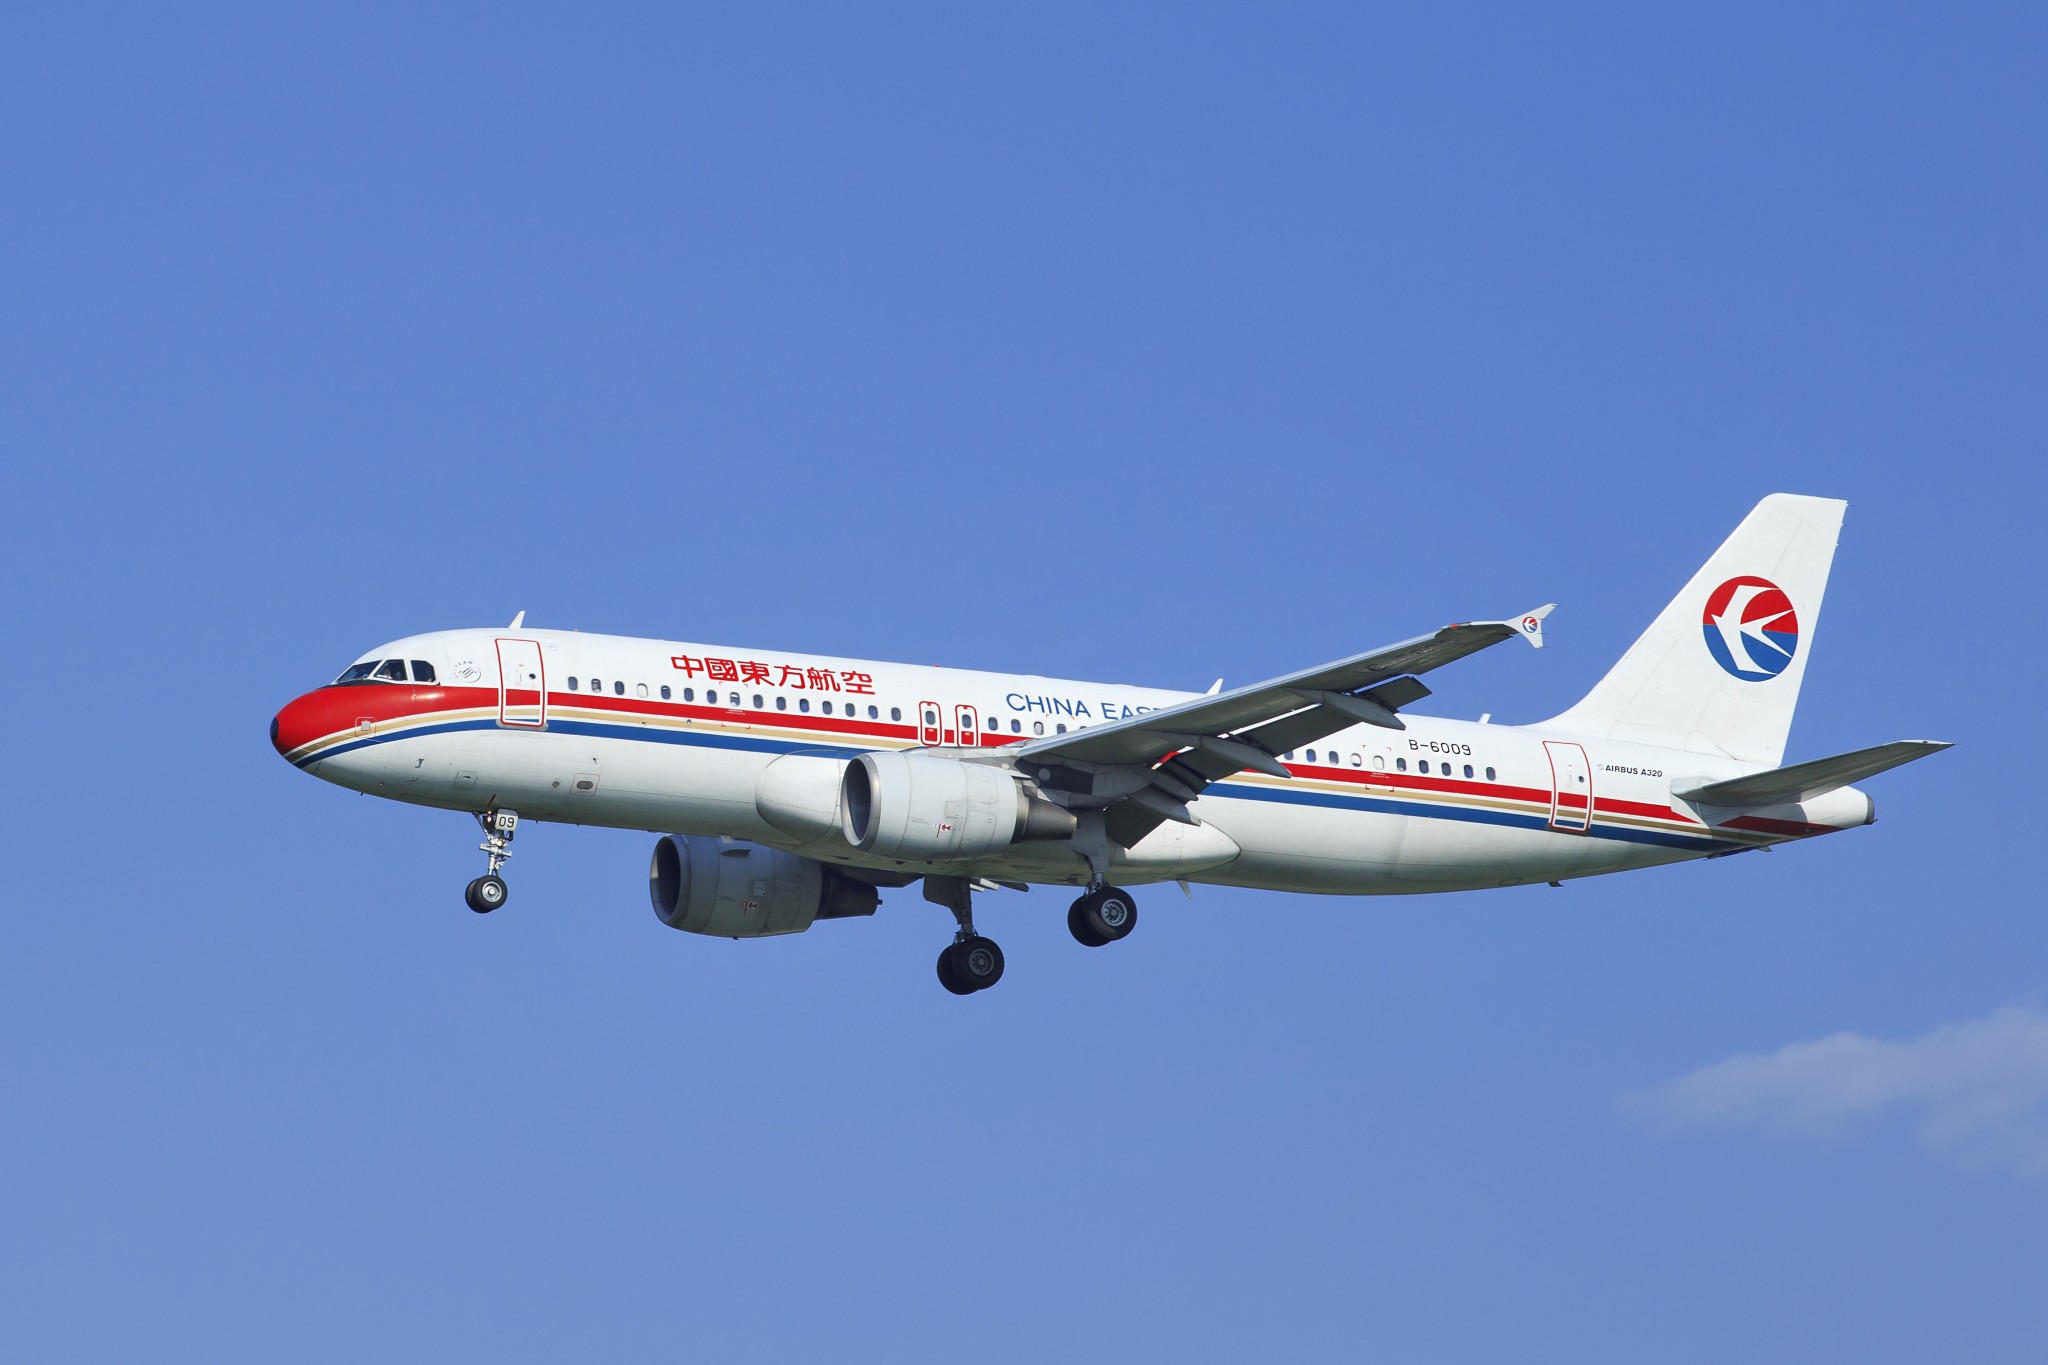 Xiamen Lease signs purchase and leaseback agreement with China Eastern Airlines for 28 aircraft